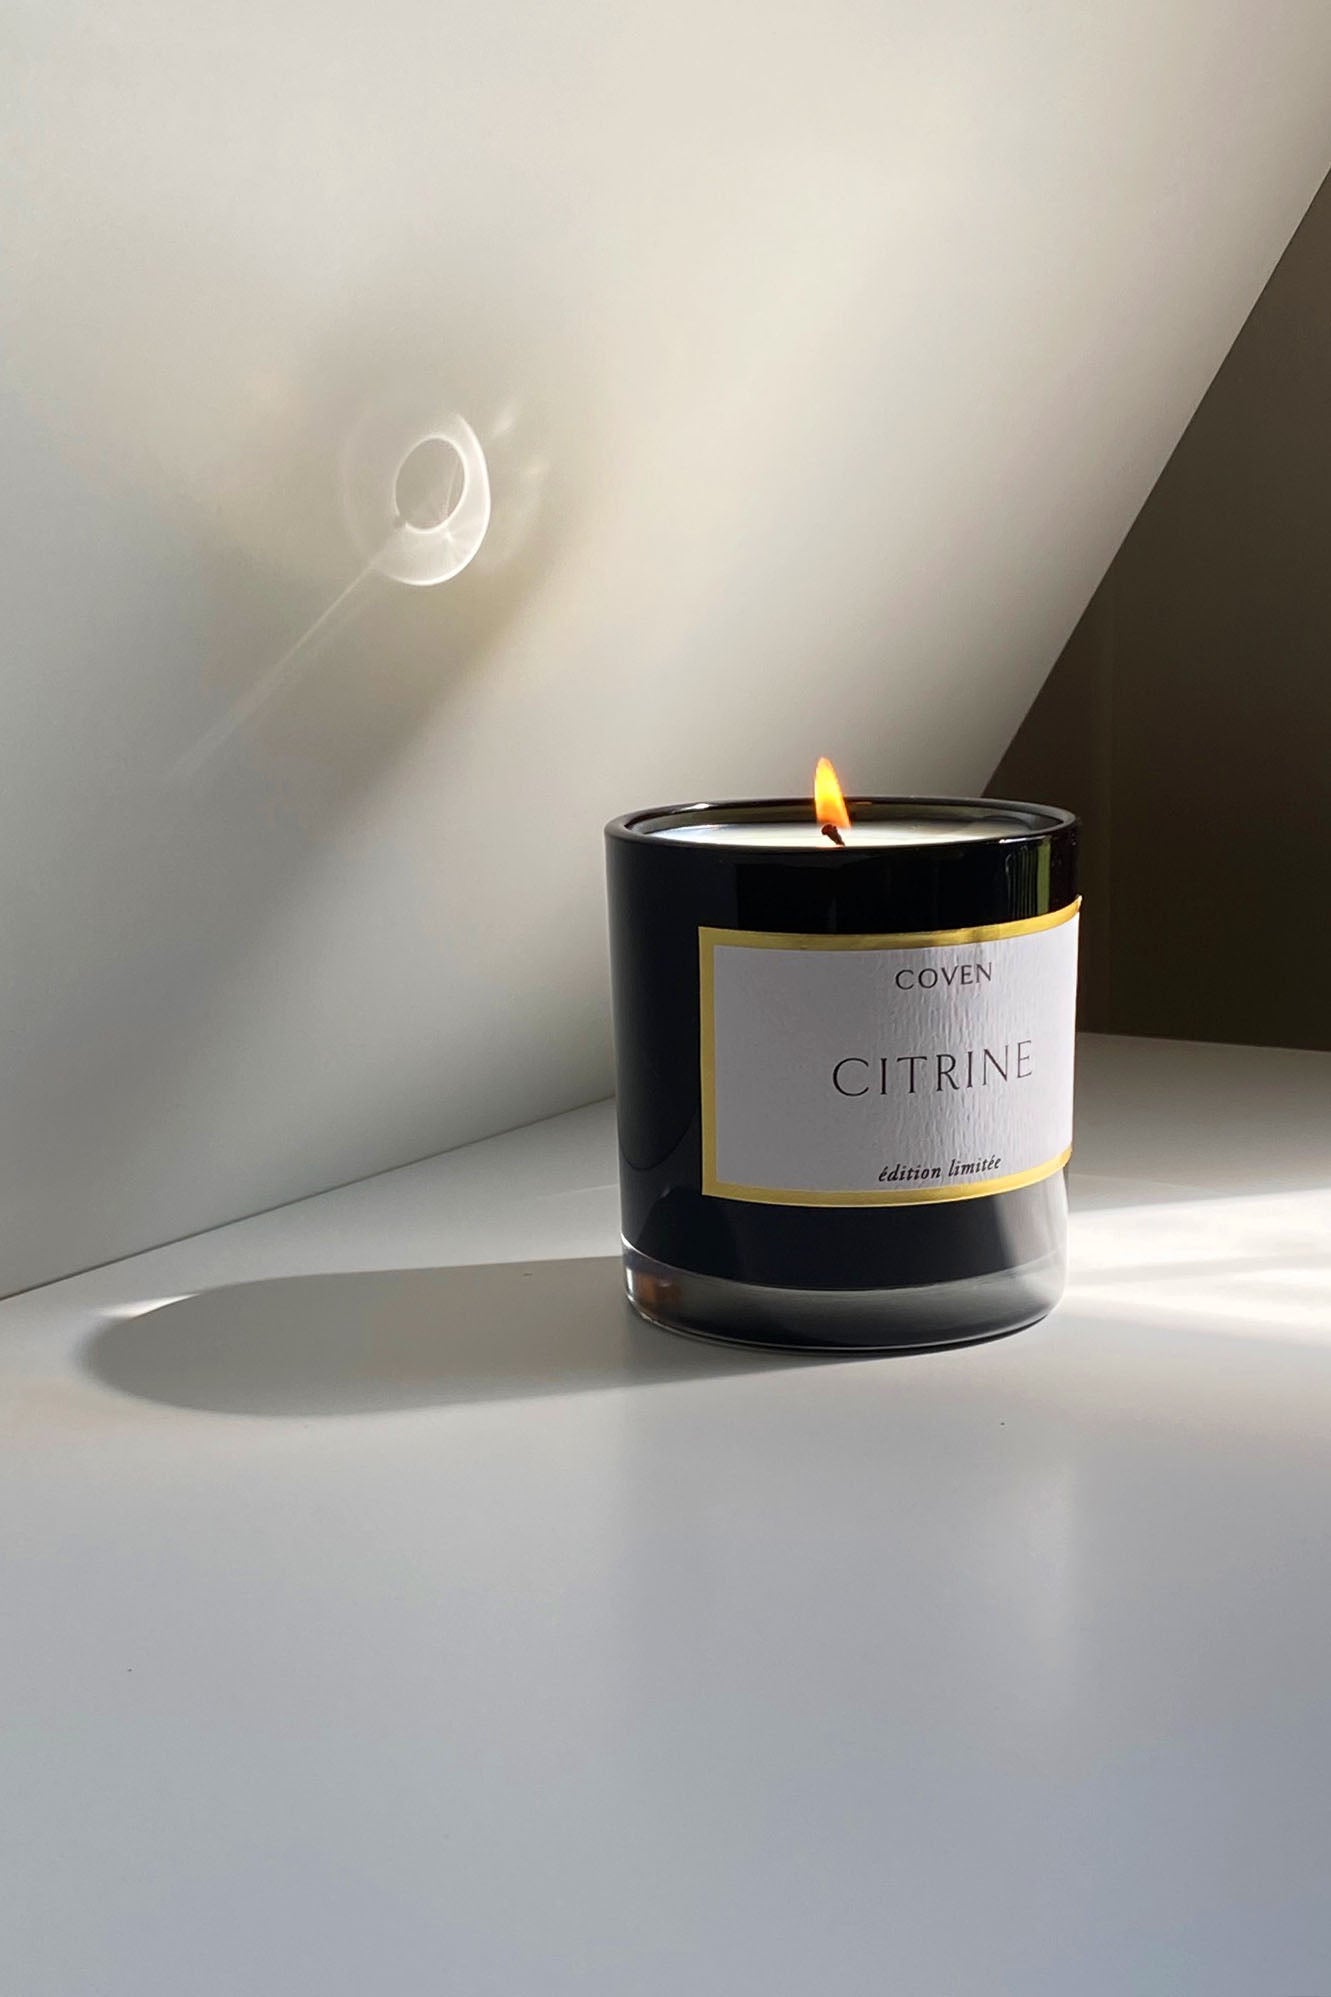 Coven Citrine Candle